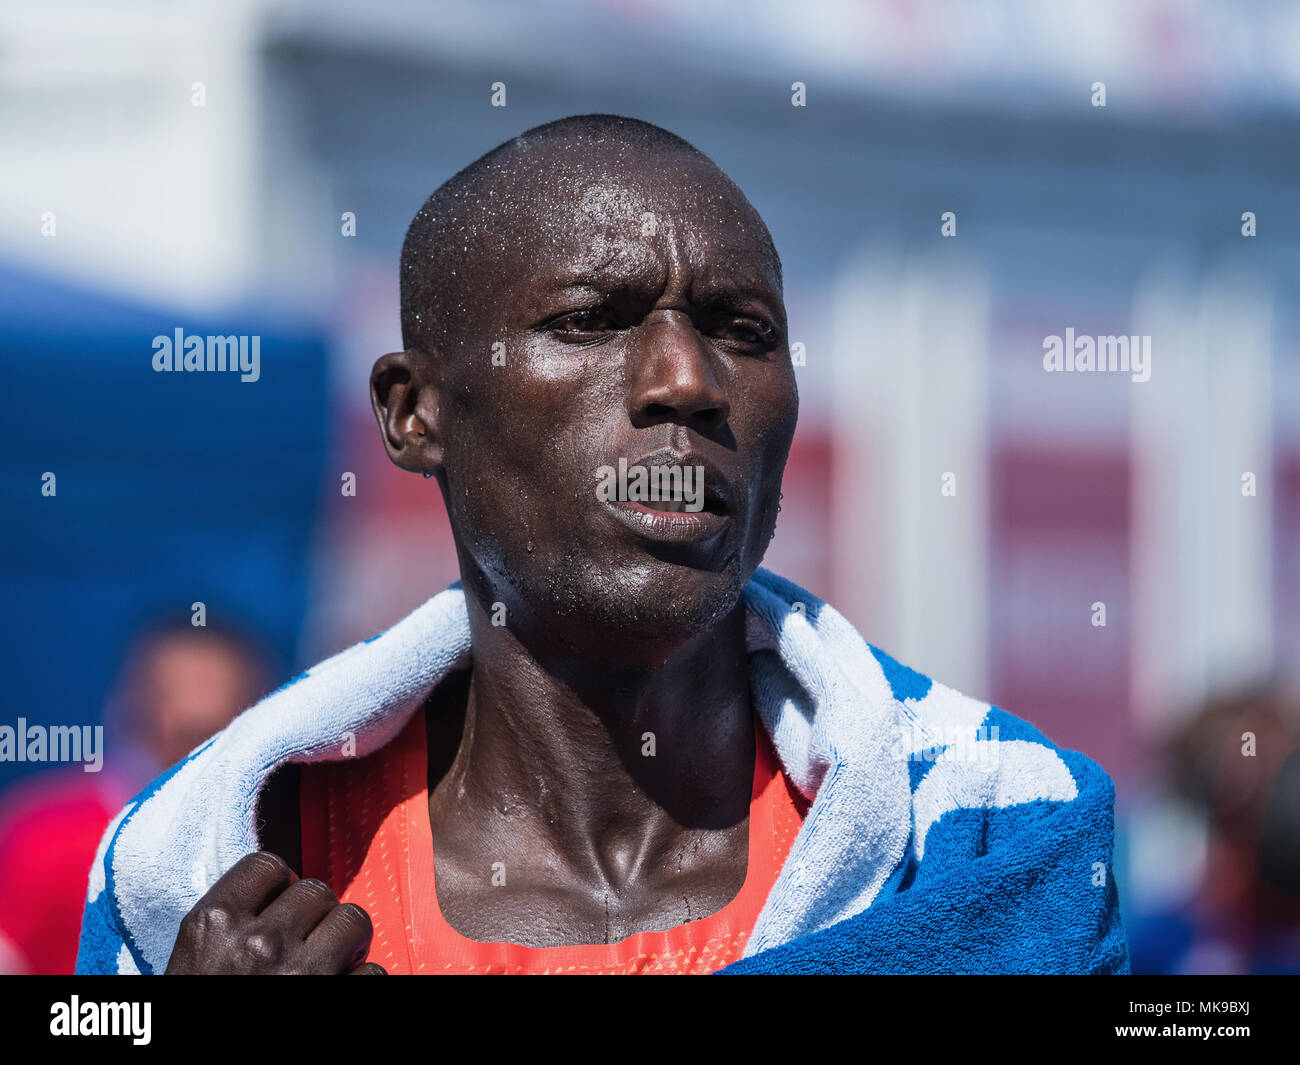 Prague, Czech Republic - May 6, 2018: Stephen Kiprotich runs with Sissay Lema on the Marathon track in Prague Volkswagen Prague Marathon 2018 in Pragu Stock Photo